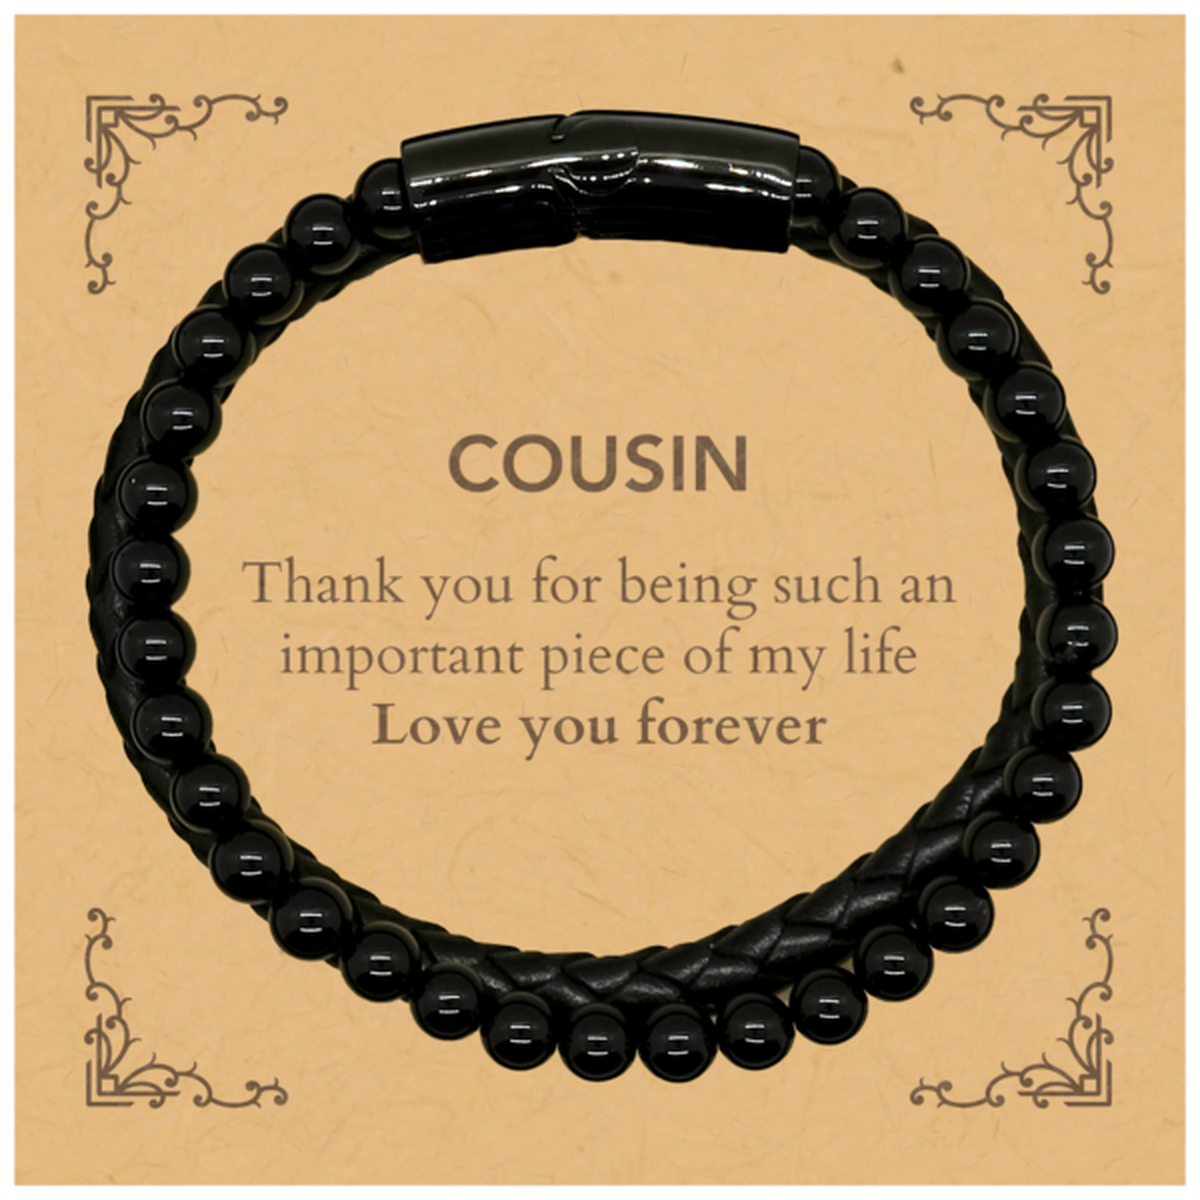 Appropriate Cousin Stone Leather Bracelets Epic Birthday Gifts for Cousin Thank you for being such an important piece of my life Cousin Christmas Mothers Fathers Day